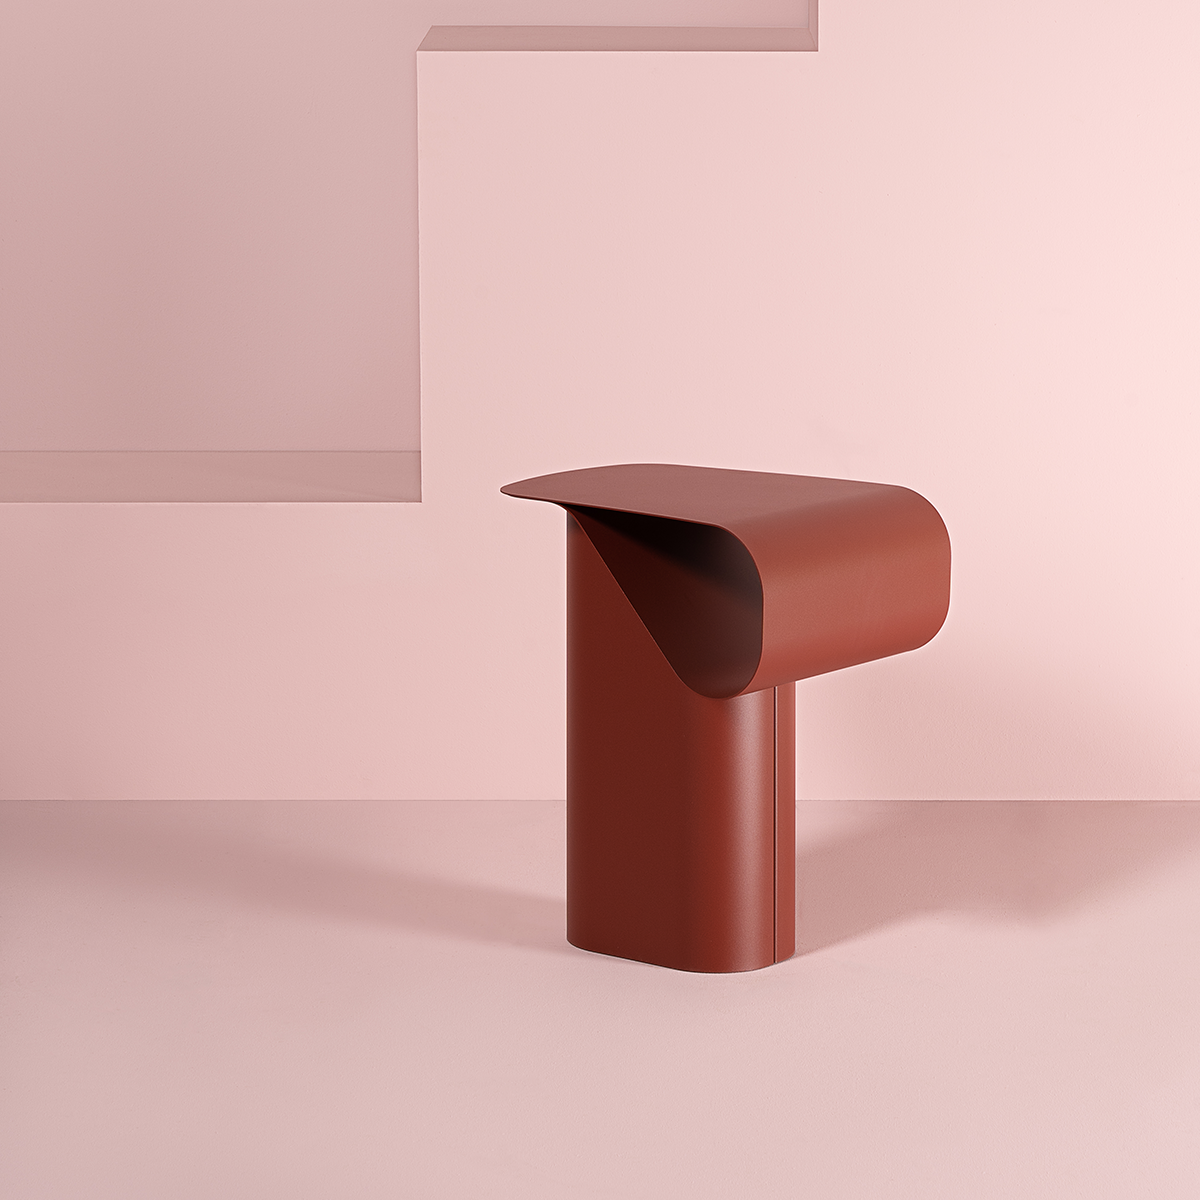 Revue side table bordeaux by Andrea Steidl for Dante - Goods and Bads